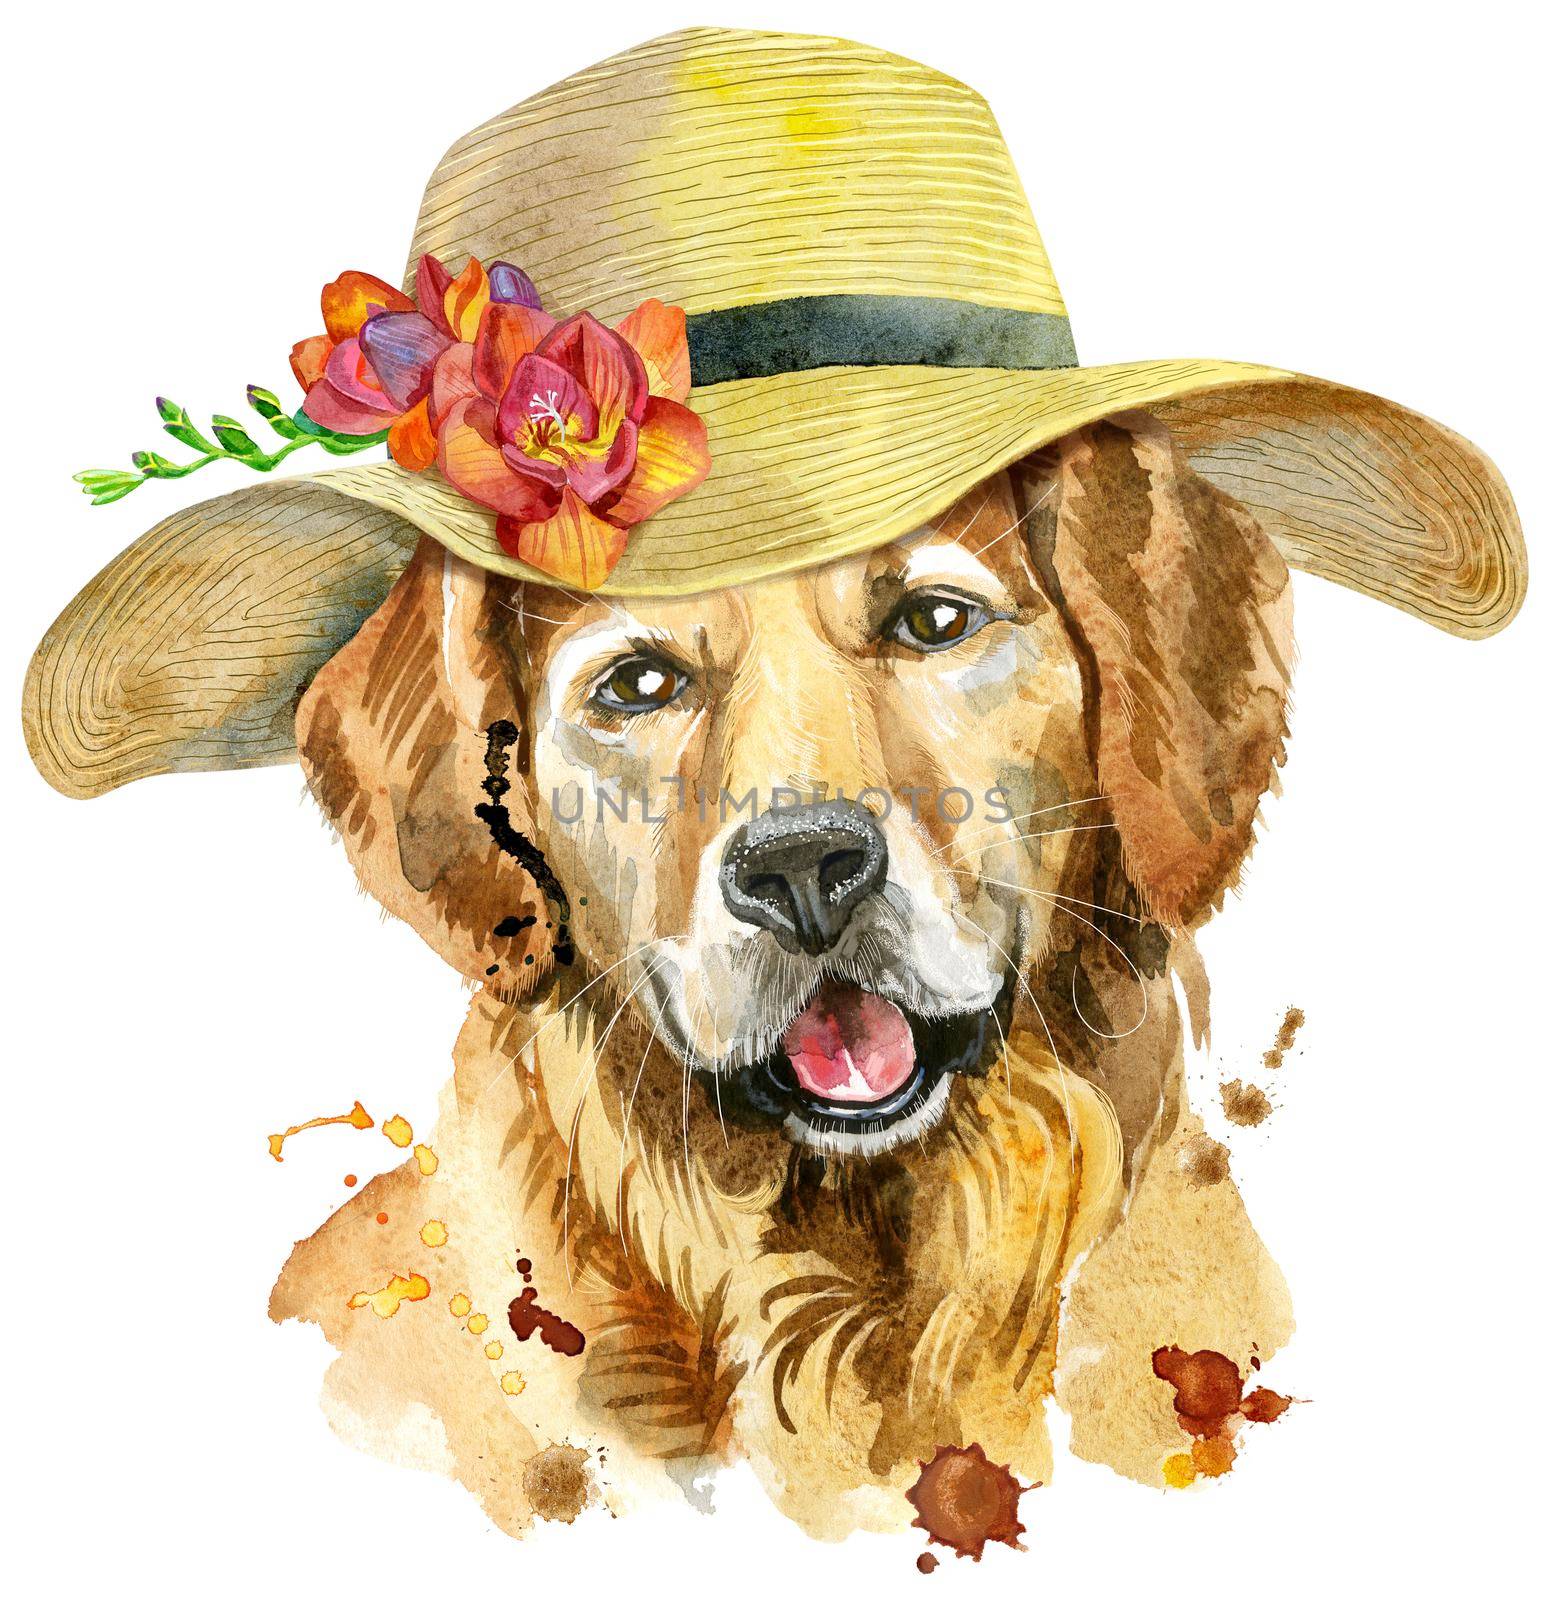 Cute Dog. Dog T-shirt graphics. watercolor golden retriever with a wide-brimmed summer hat illustration